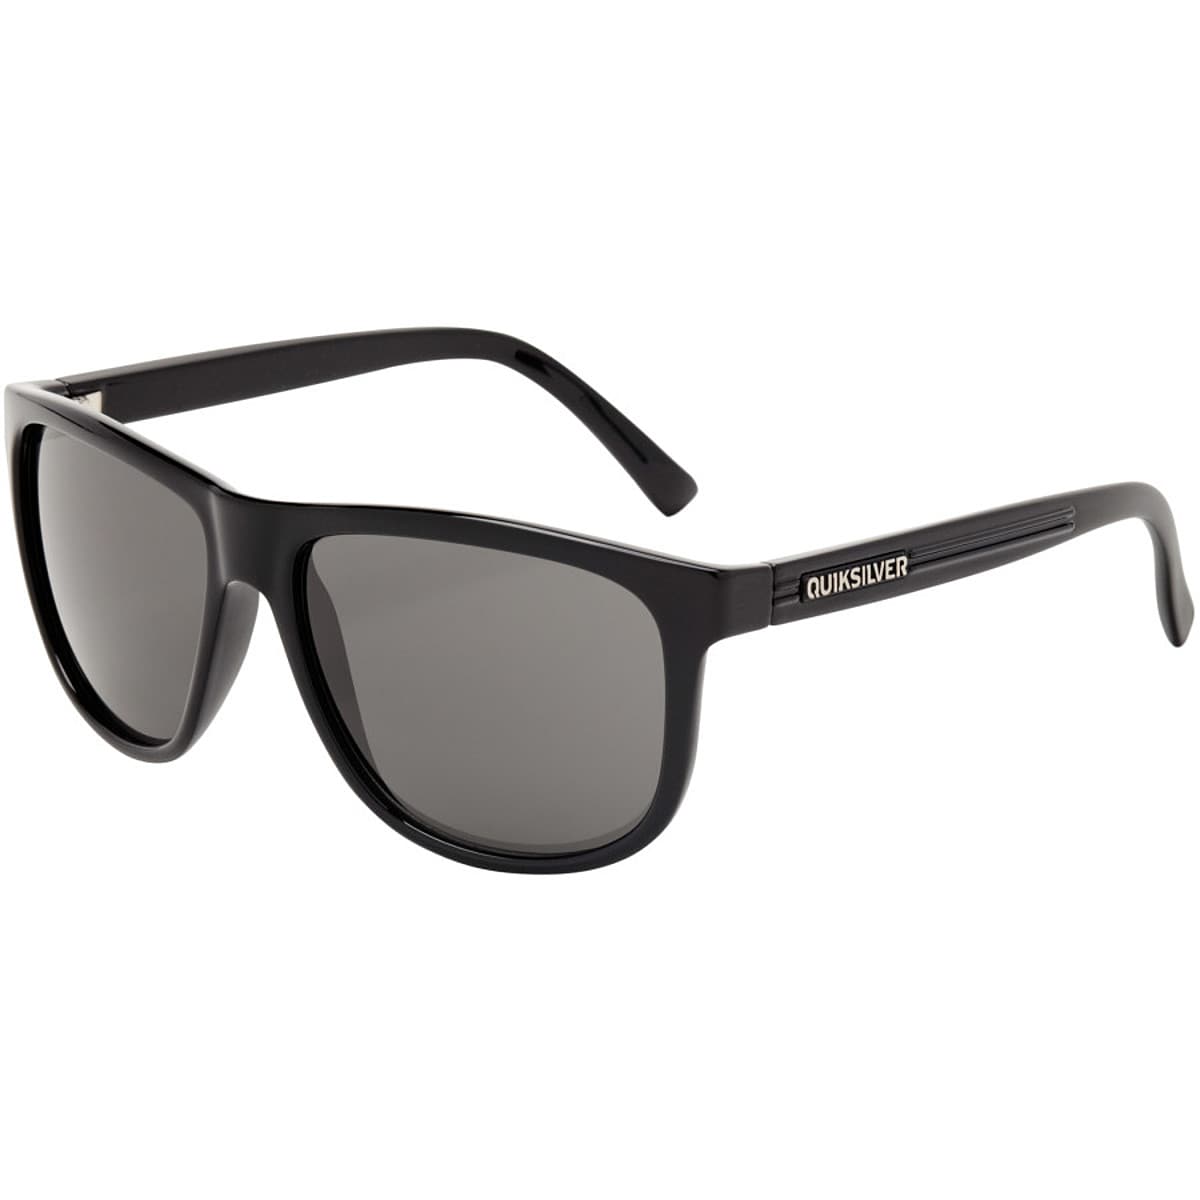 Point - Quiksilver On Sunglasses Accessories